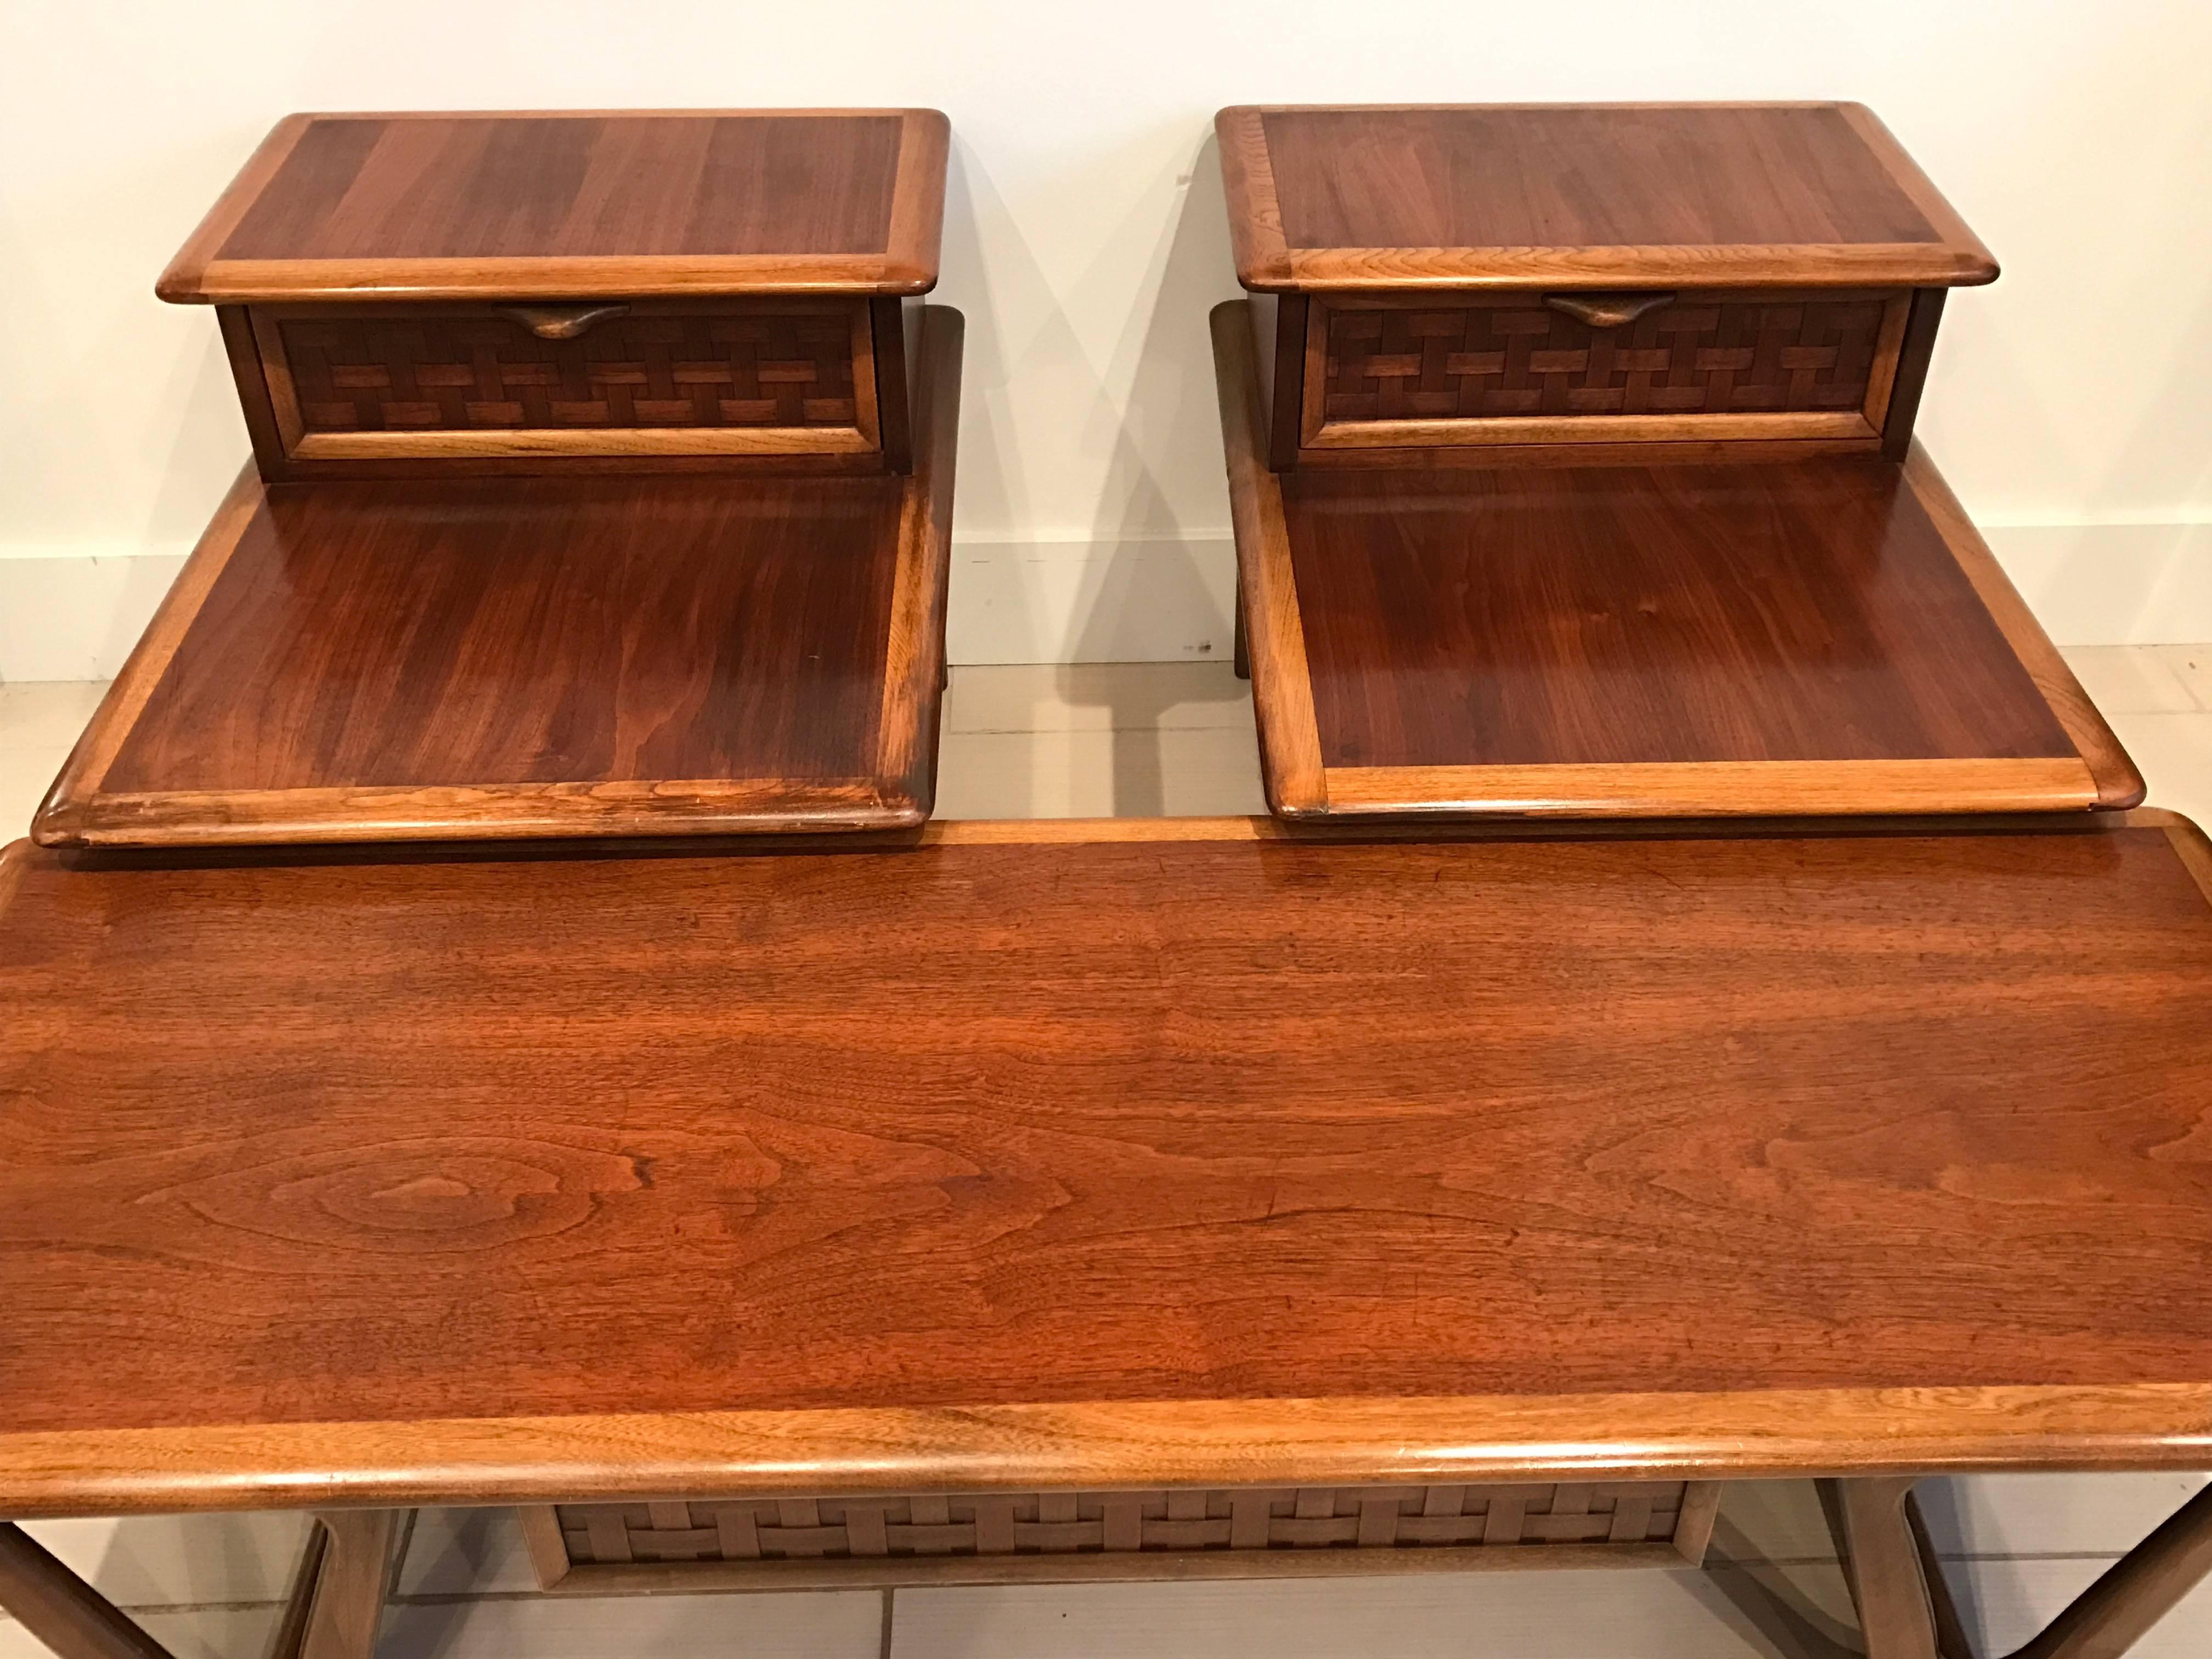 Awesome matching set. Pair of end tables and matching coffee table designed by Andre Bus for Lane. Perception line. Coffee table has a drawer under the center of the table with a basket weave design drawer front. End tables are two tiered with